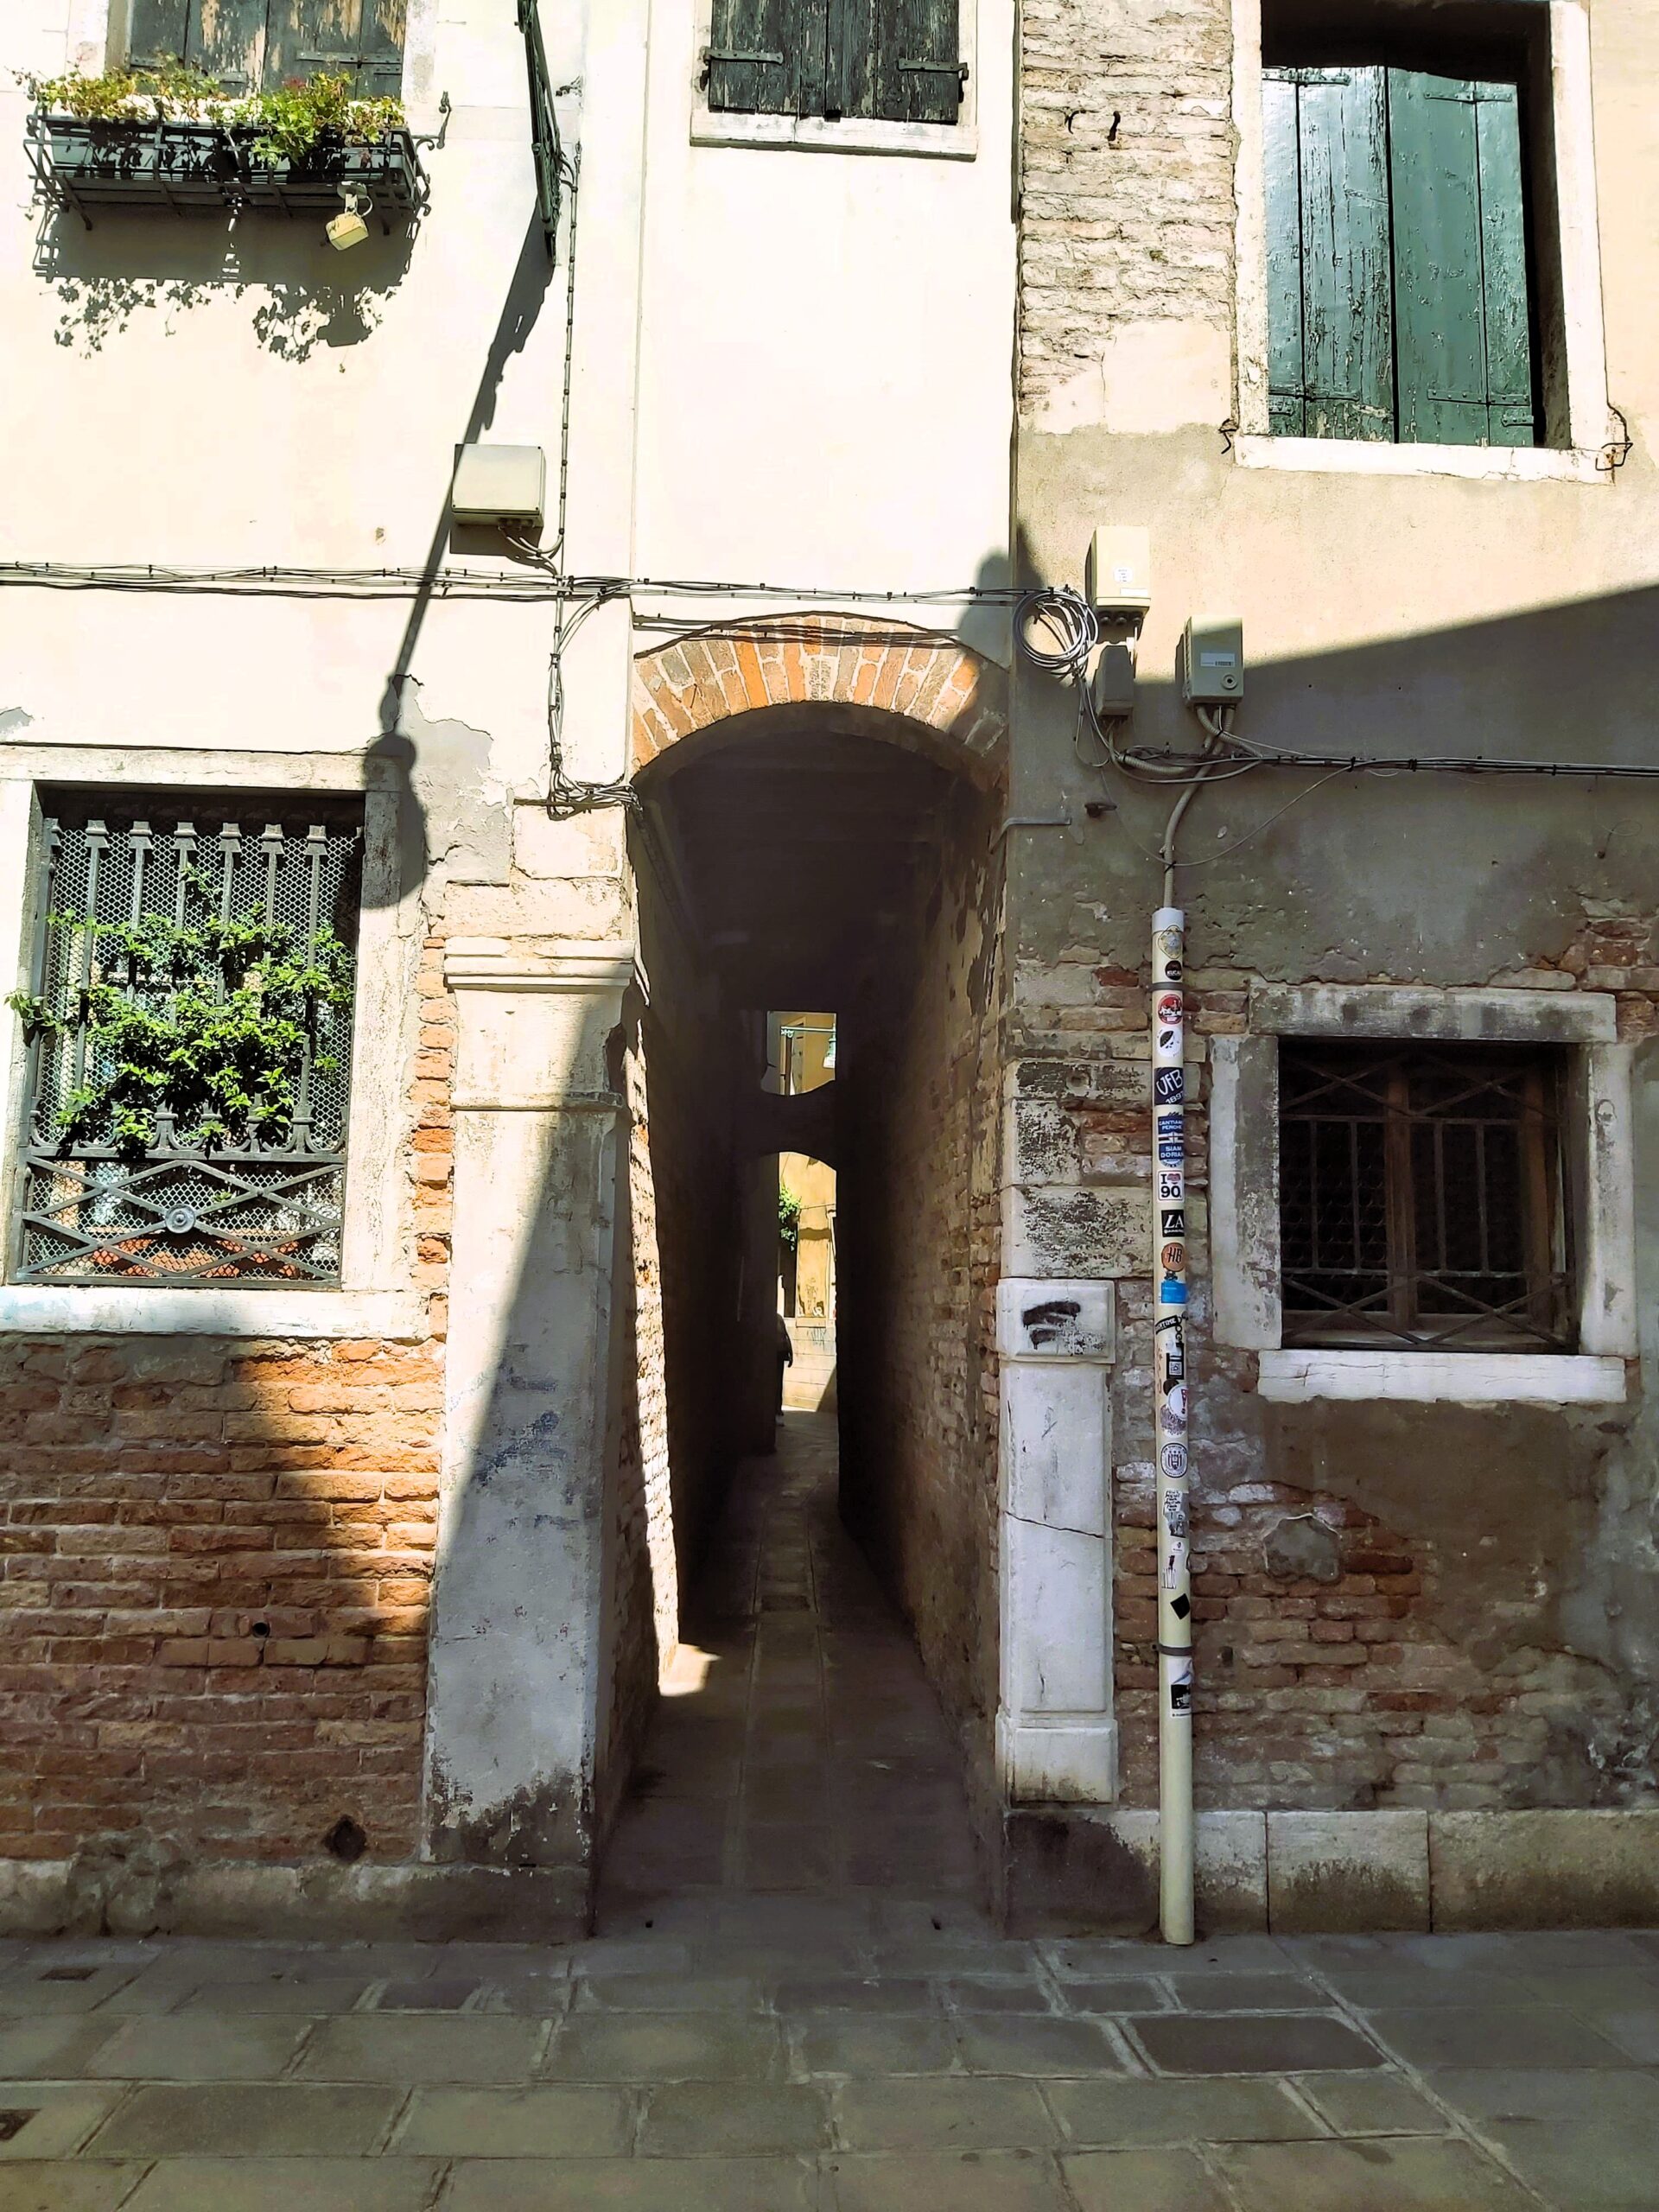 The smallest alleyway in Venice, Italy